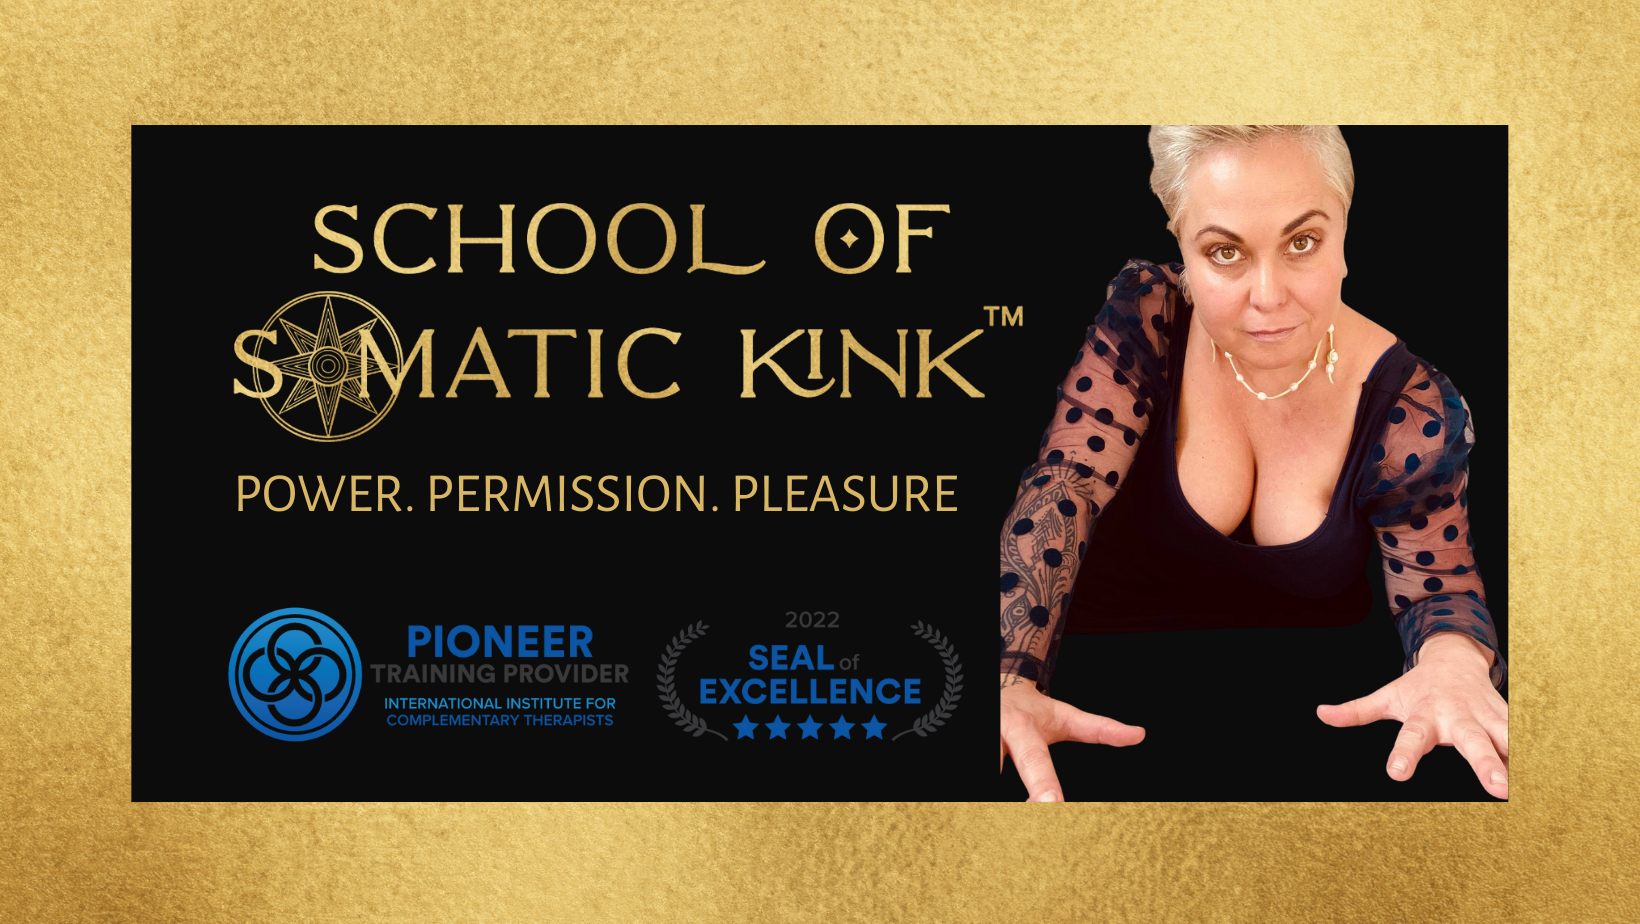 Renee Mayne, School Of Somatic Kink, Sexuality and Spirituality courses and training. 